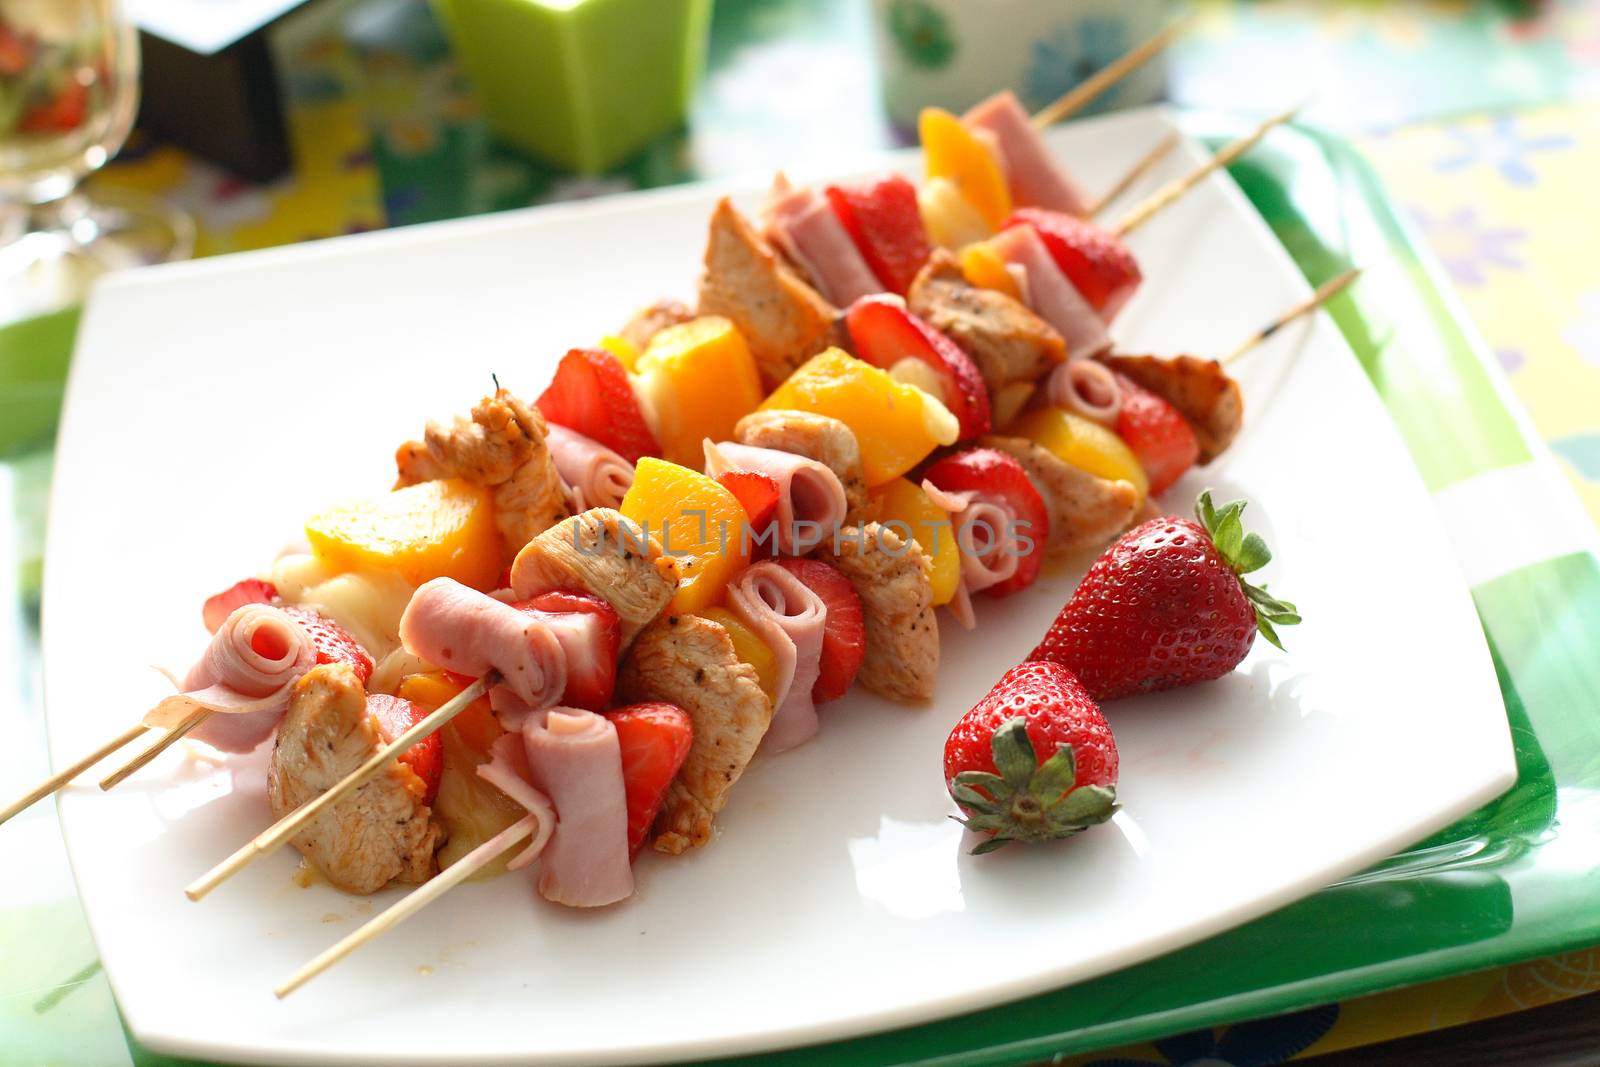 Colorful skewers of chicken, strawberries and pineapple on a white plate